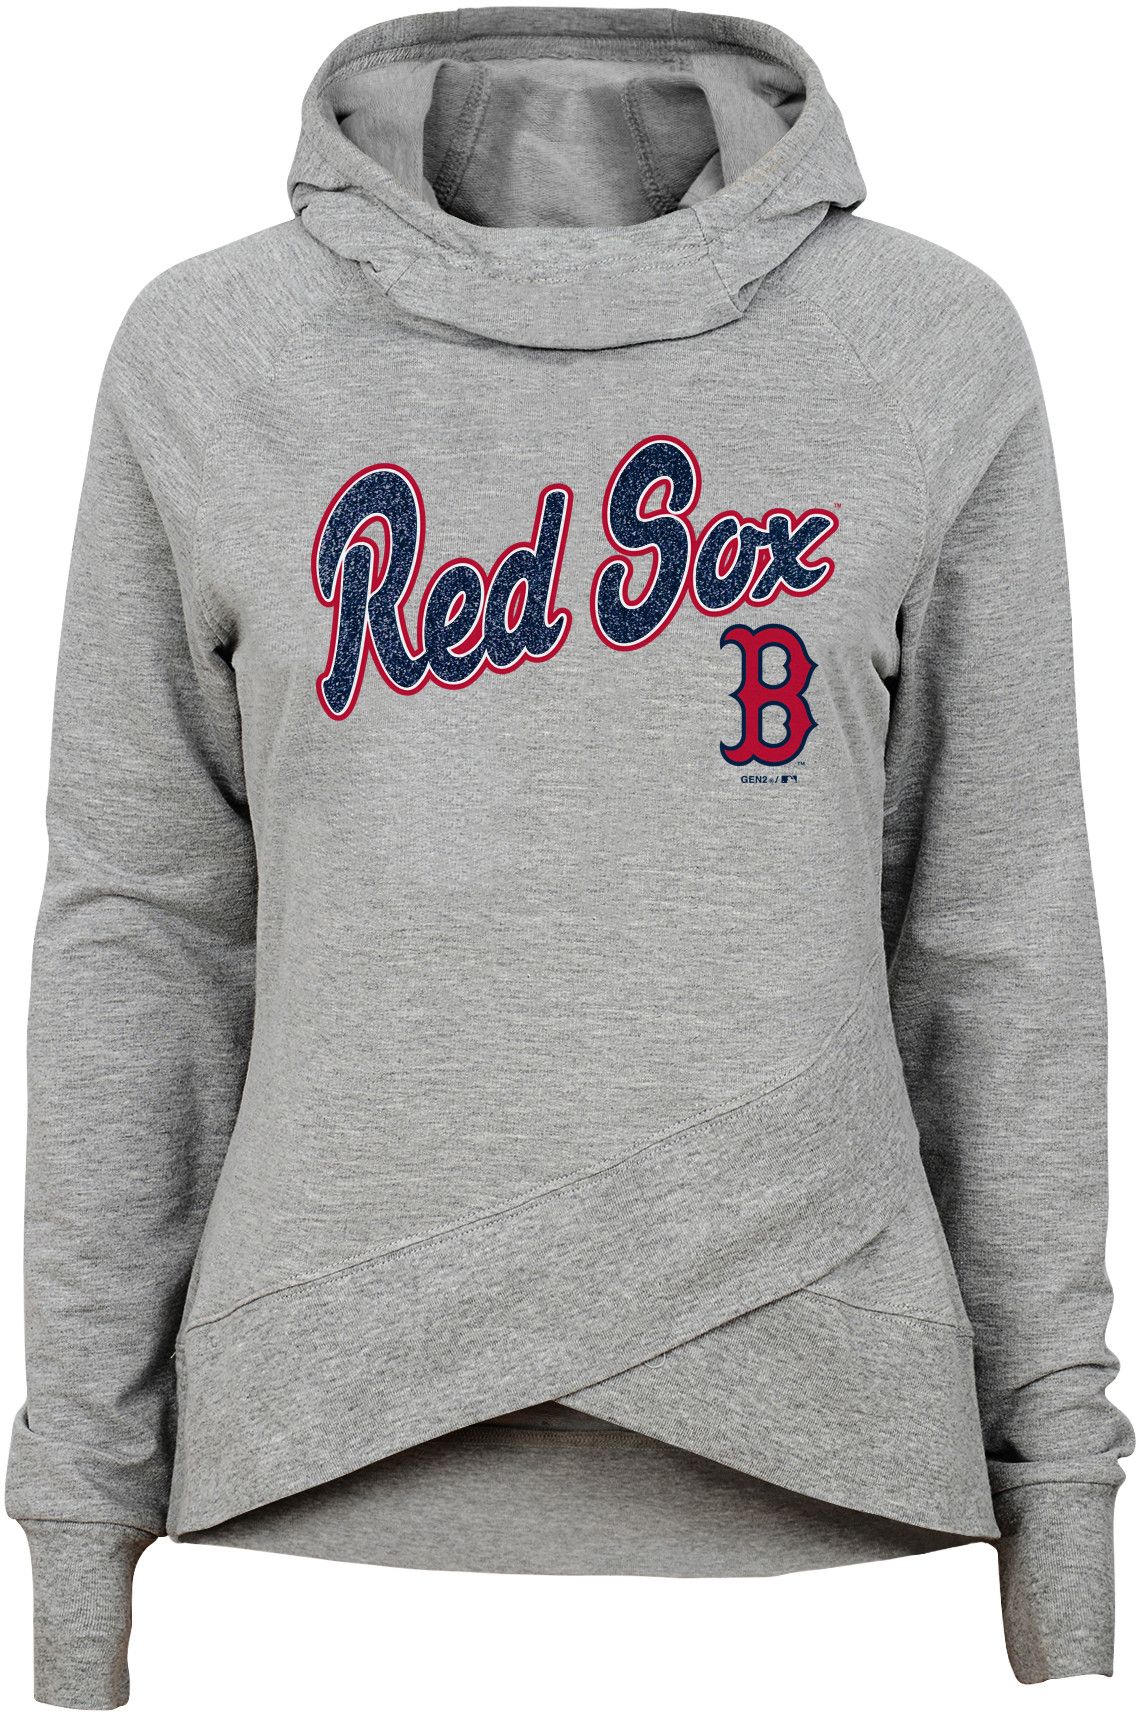 boston red sox youth apparel